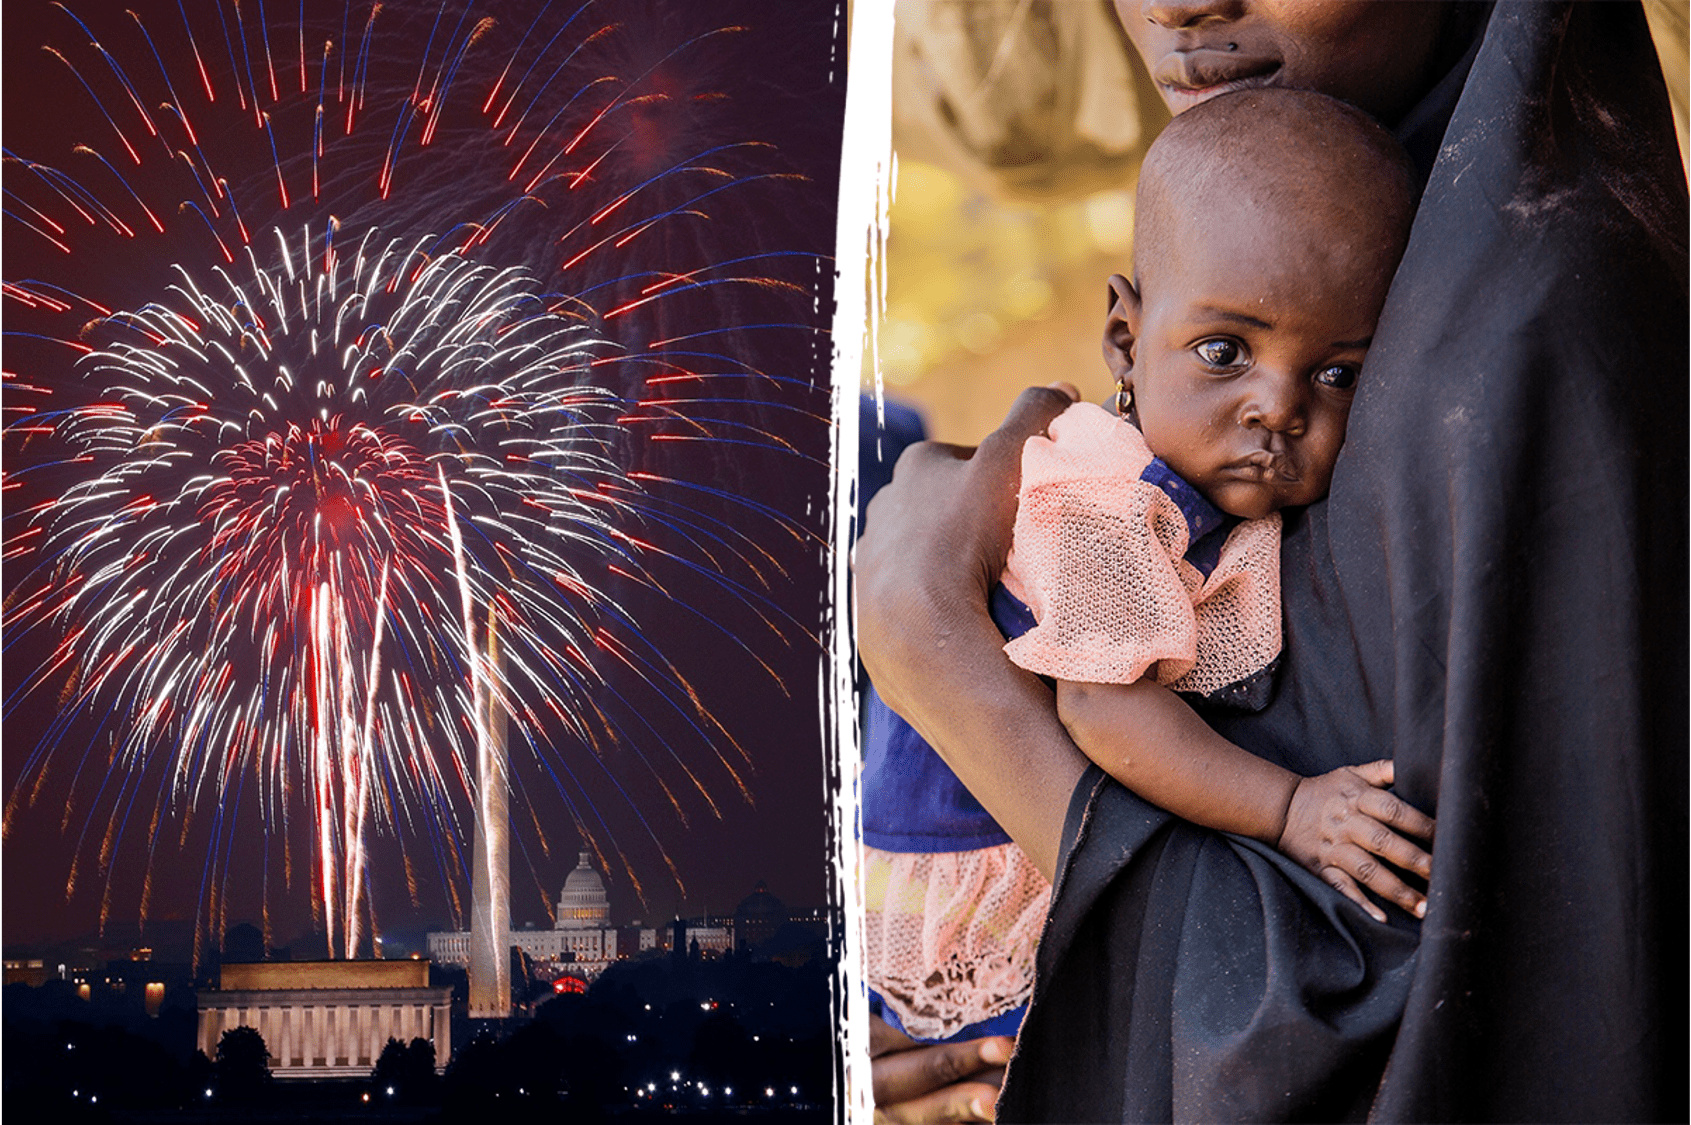 young girl and fireworks in Washington D.C.